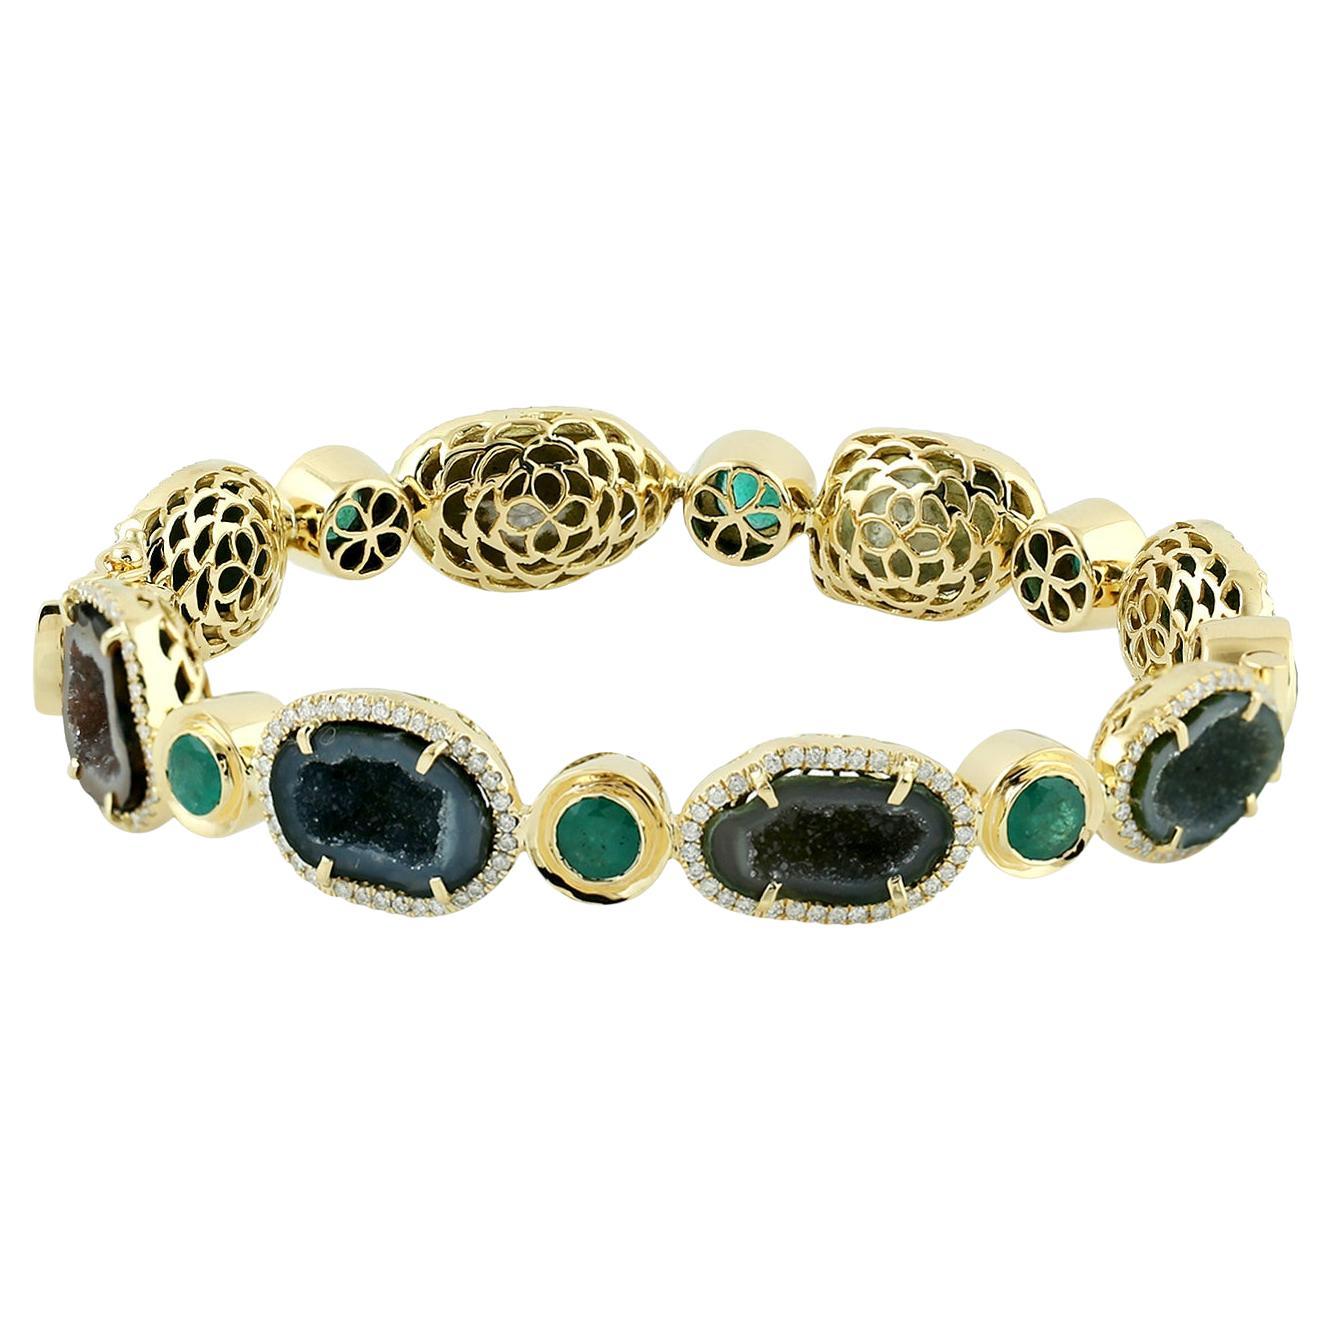 Emerald & Geode Bracelet with Pave Diamonds Made in 18k Yellow Gold